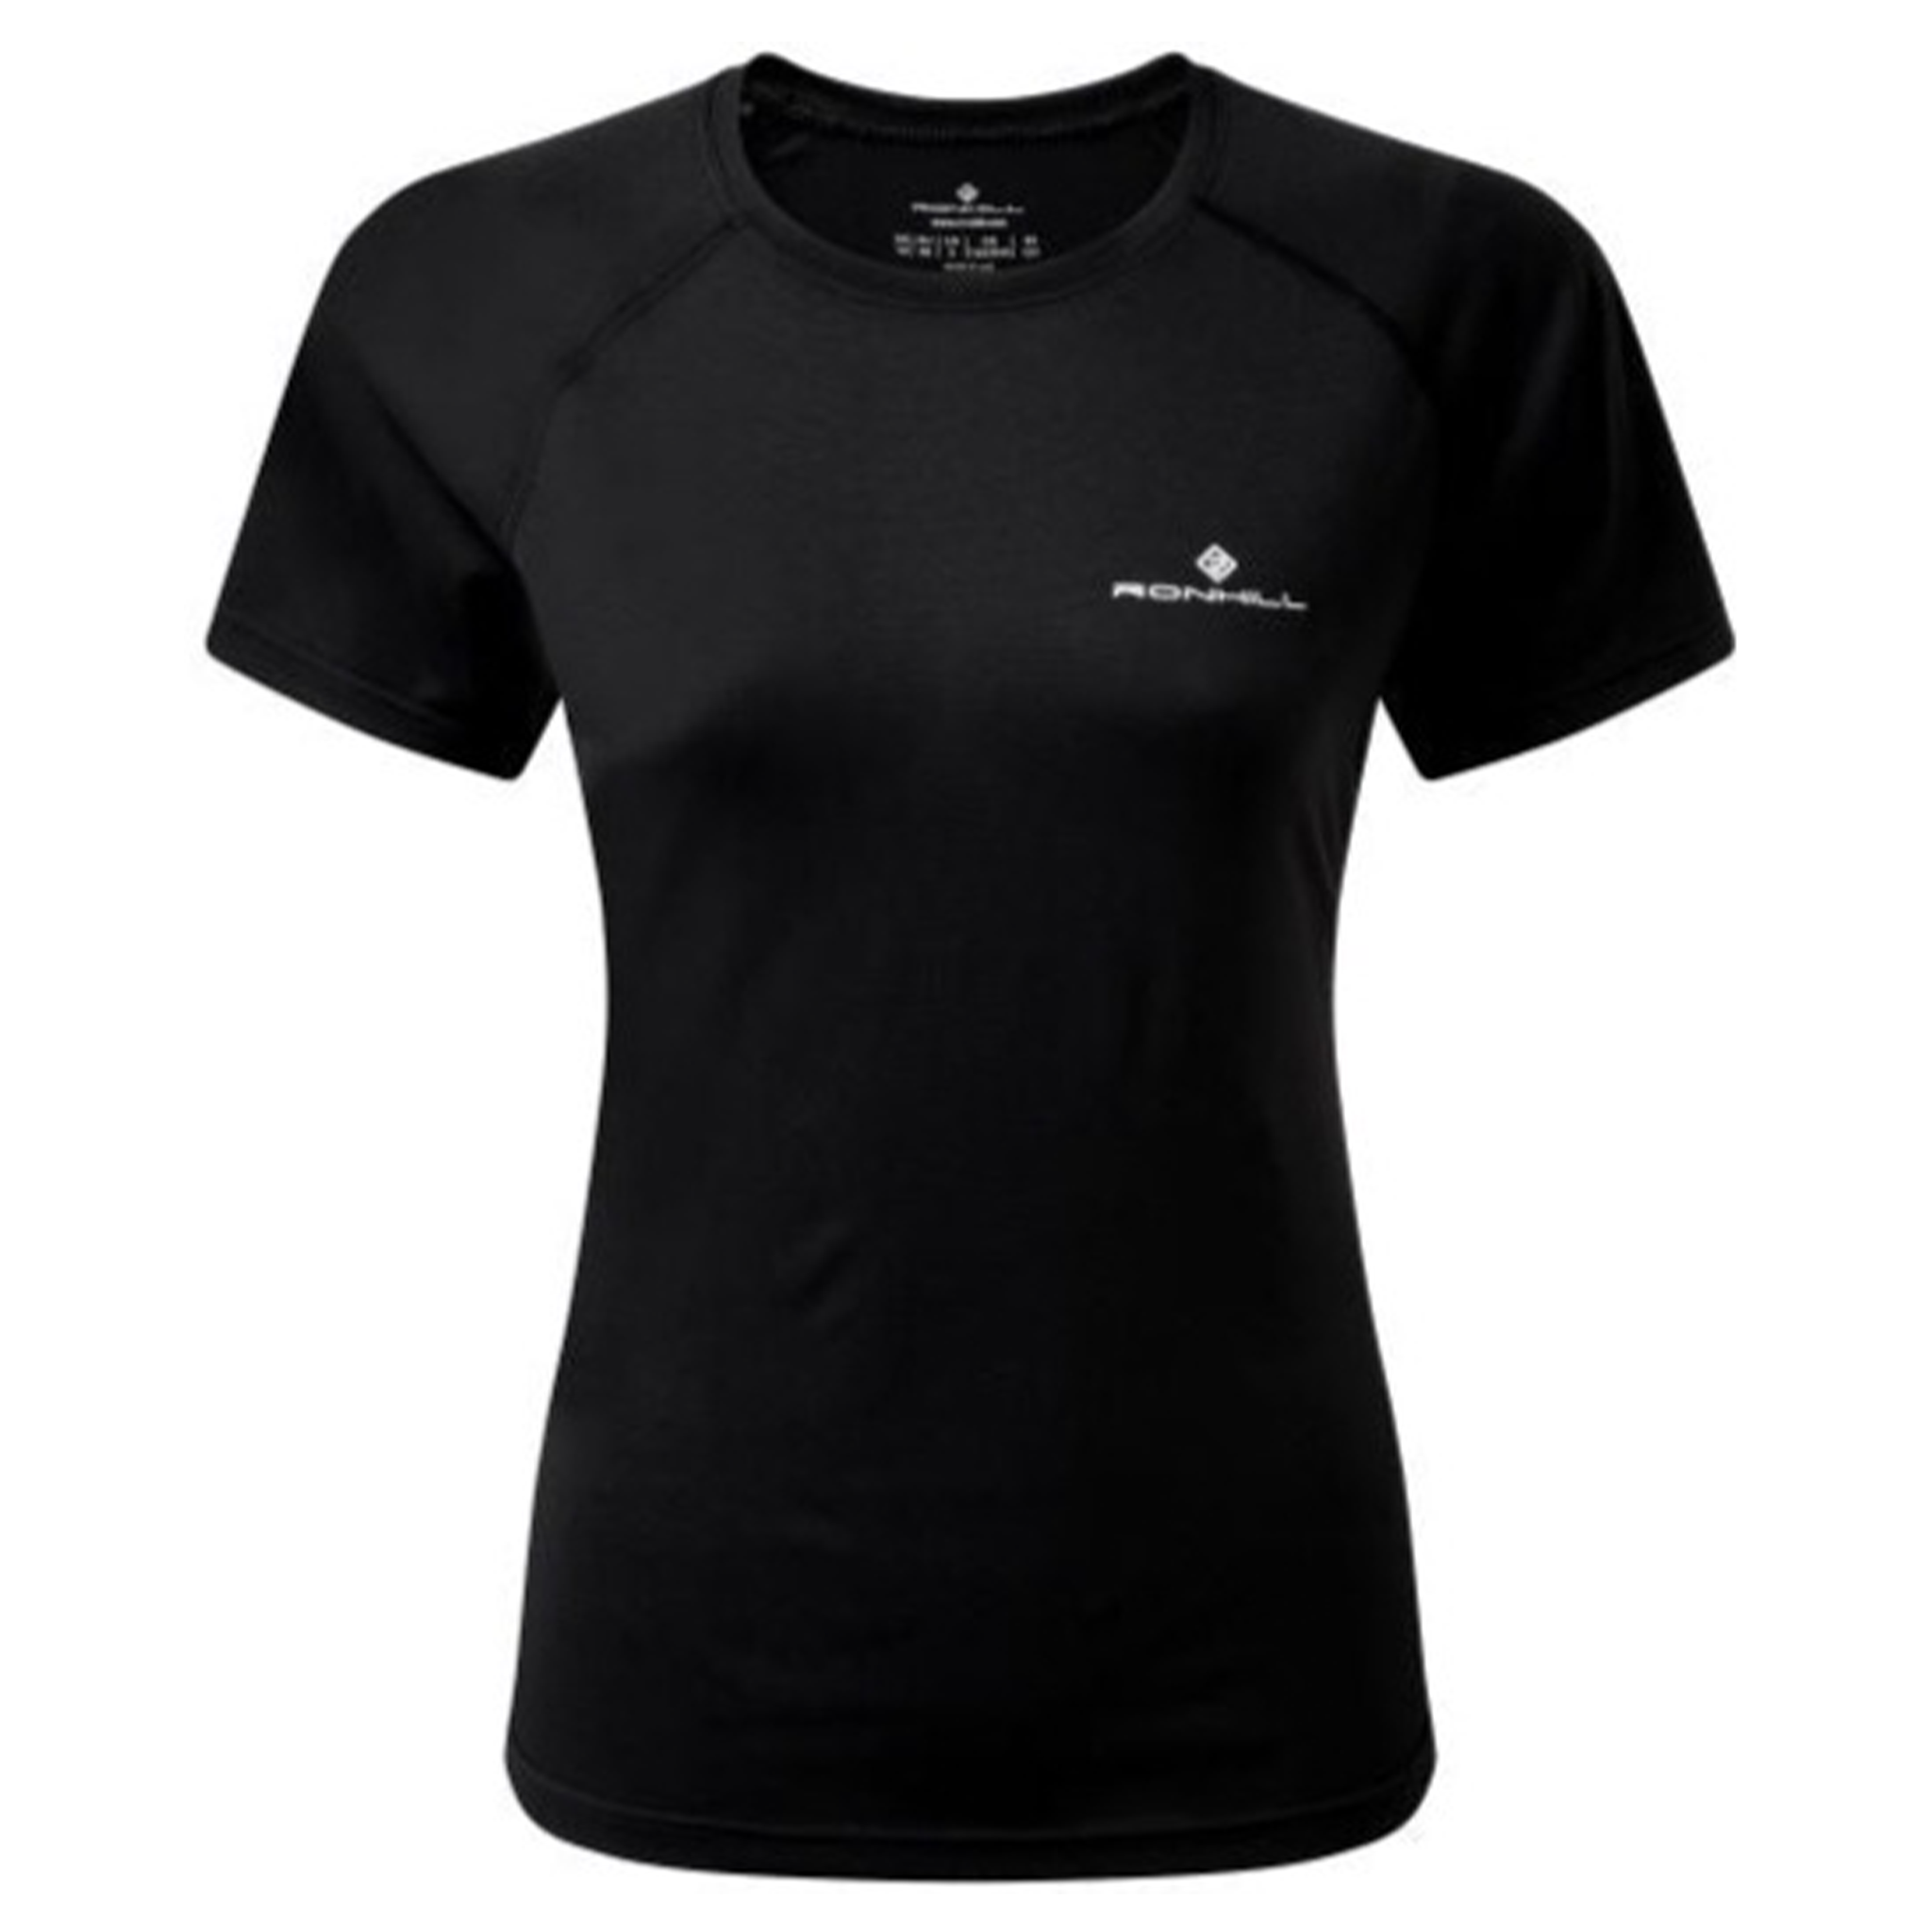 RonHill Womens Core S/S Tee - All Black